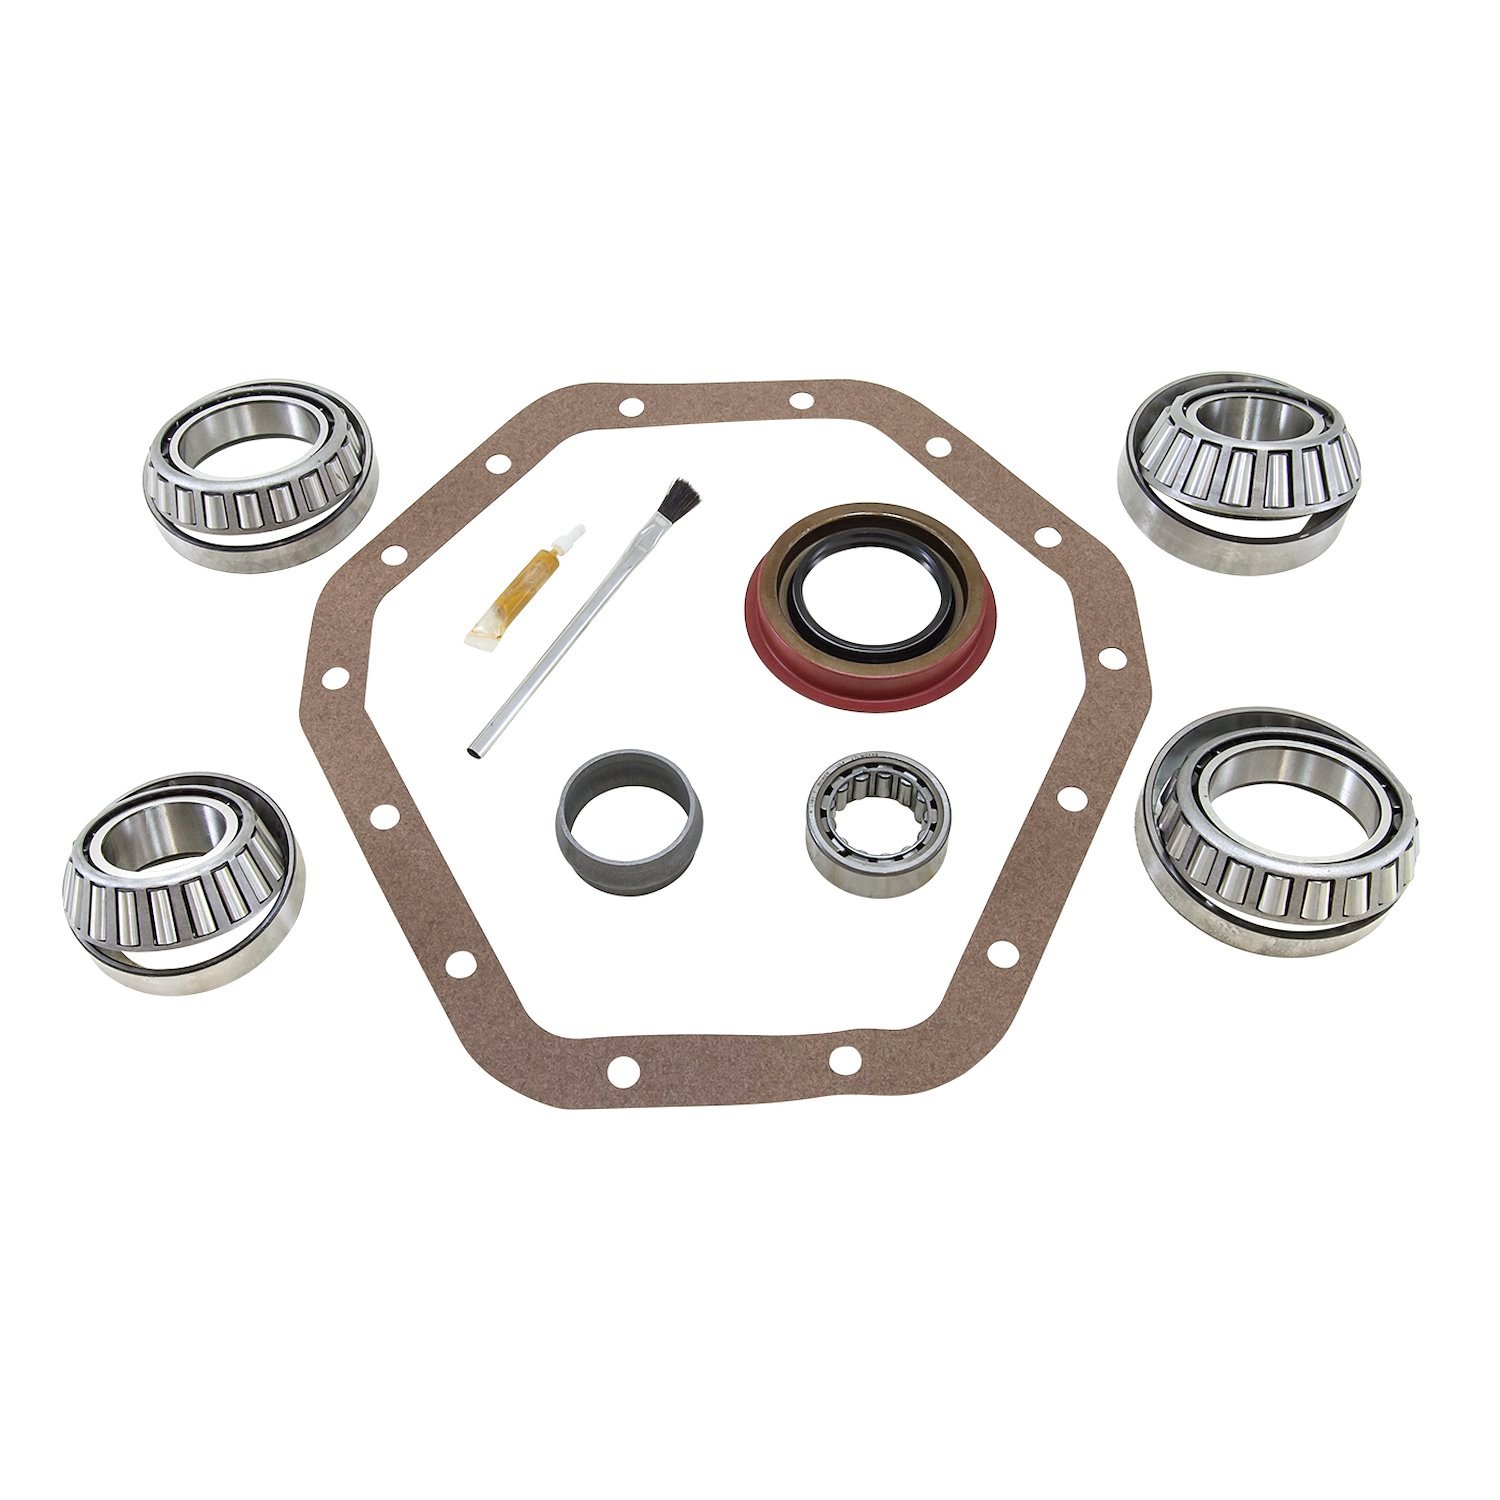 Bearing Install Kit For '98 And Newer 10.5 in. GM 14 Bolt Truck Differential